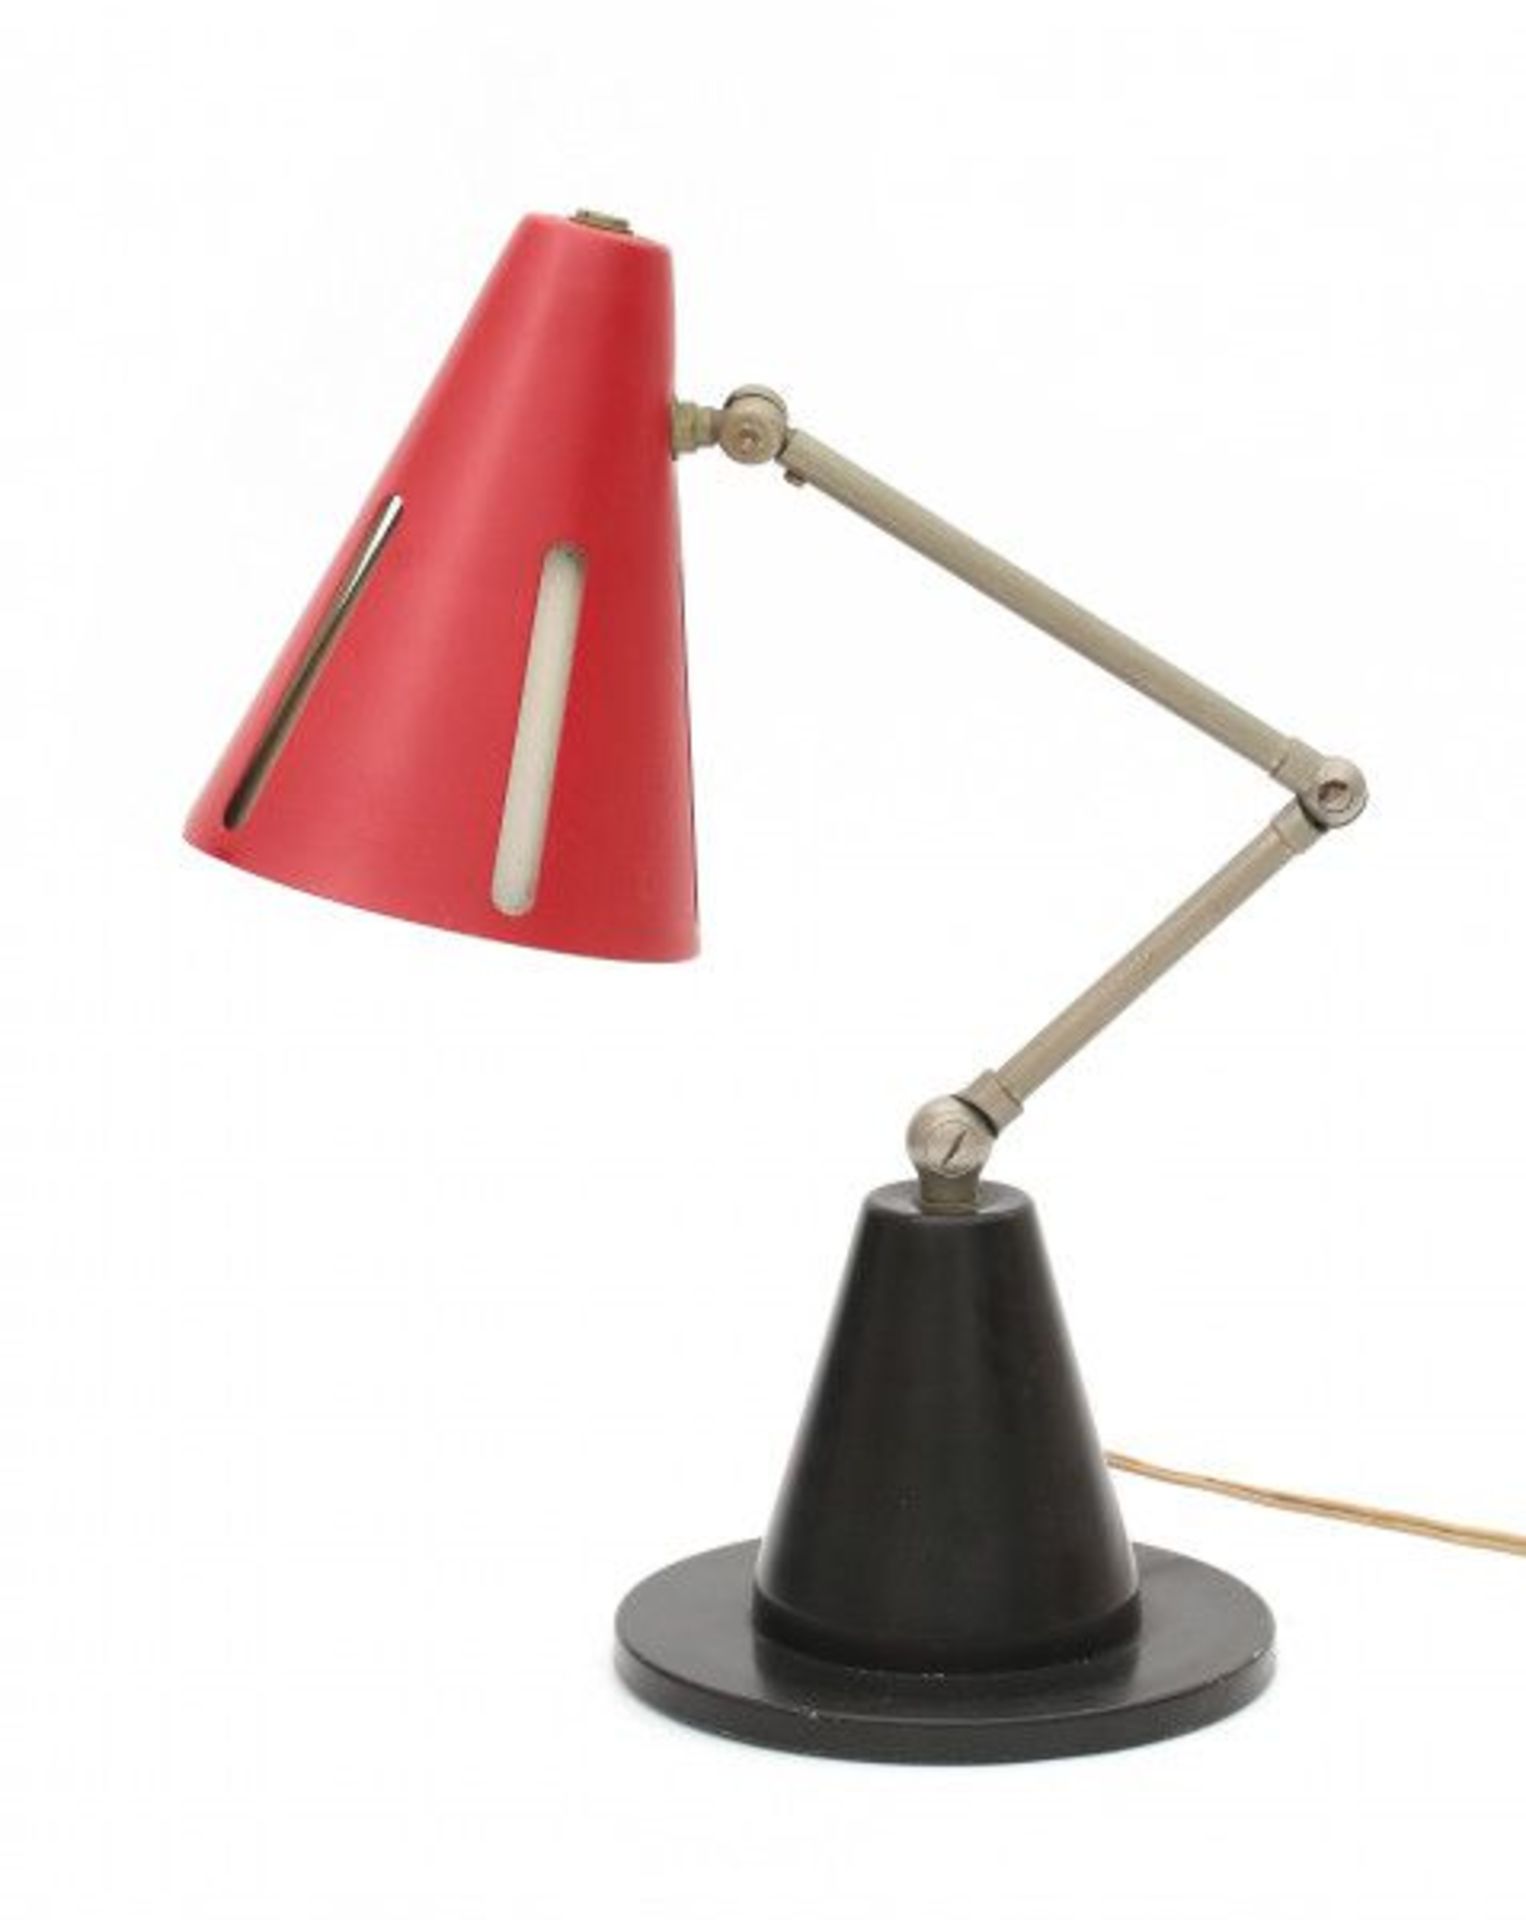 H. Th. A. Busquet (1914-1977)A nickle-plated, black, red and white lacquered metal desk lamp on